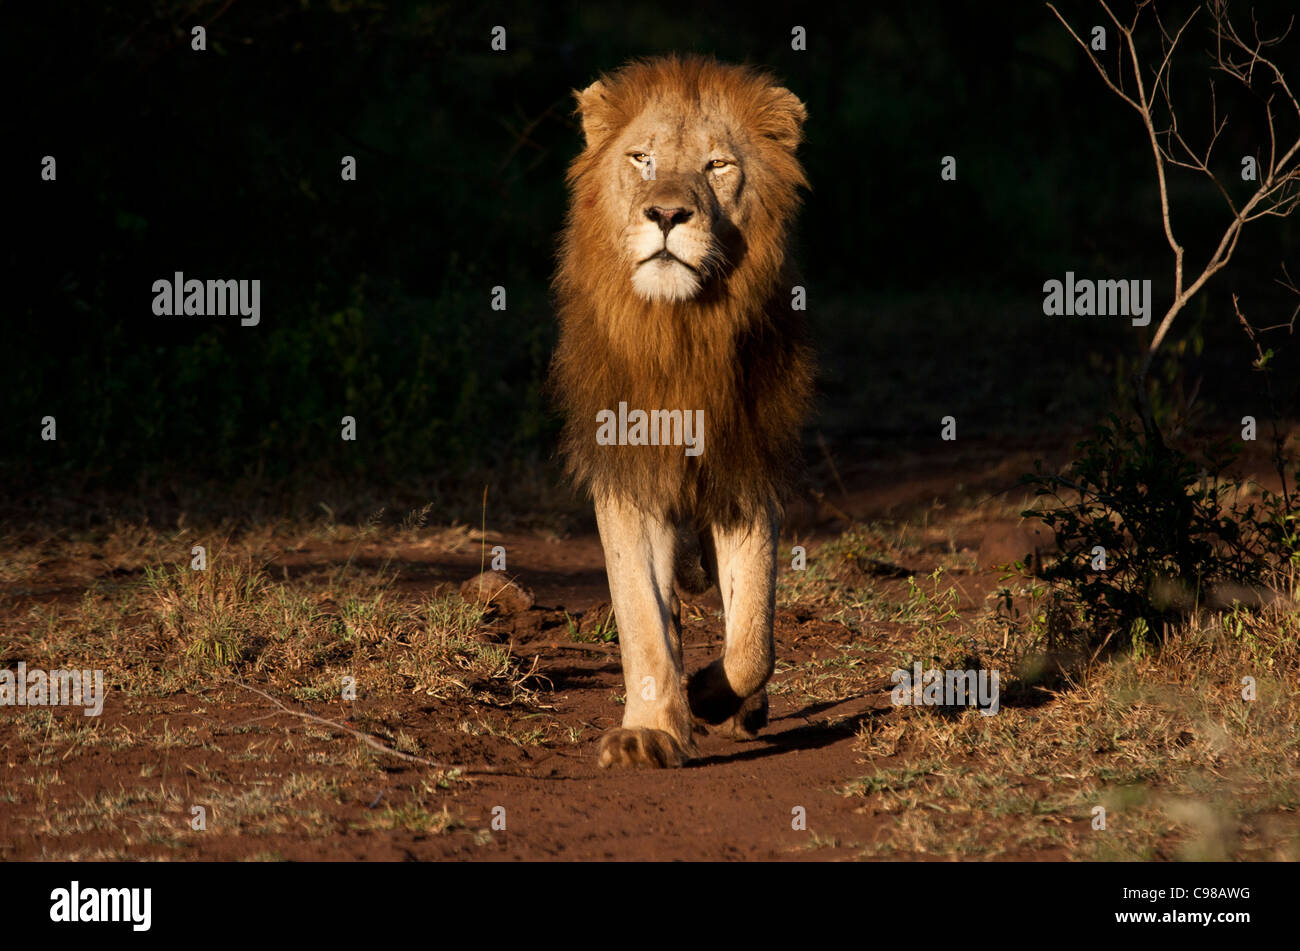 Male lion approaching from deep shade looking menacing Stock Photo